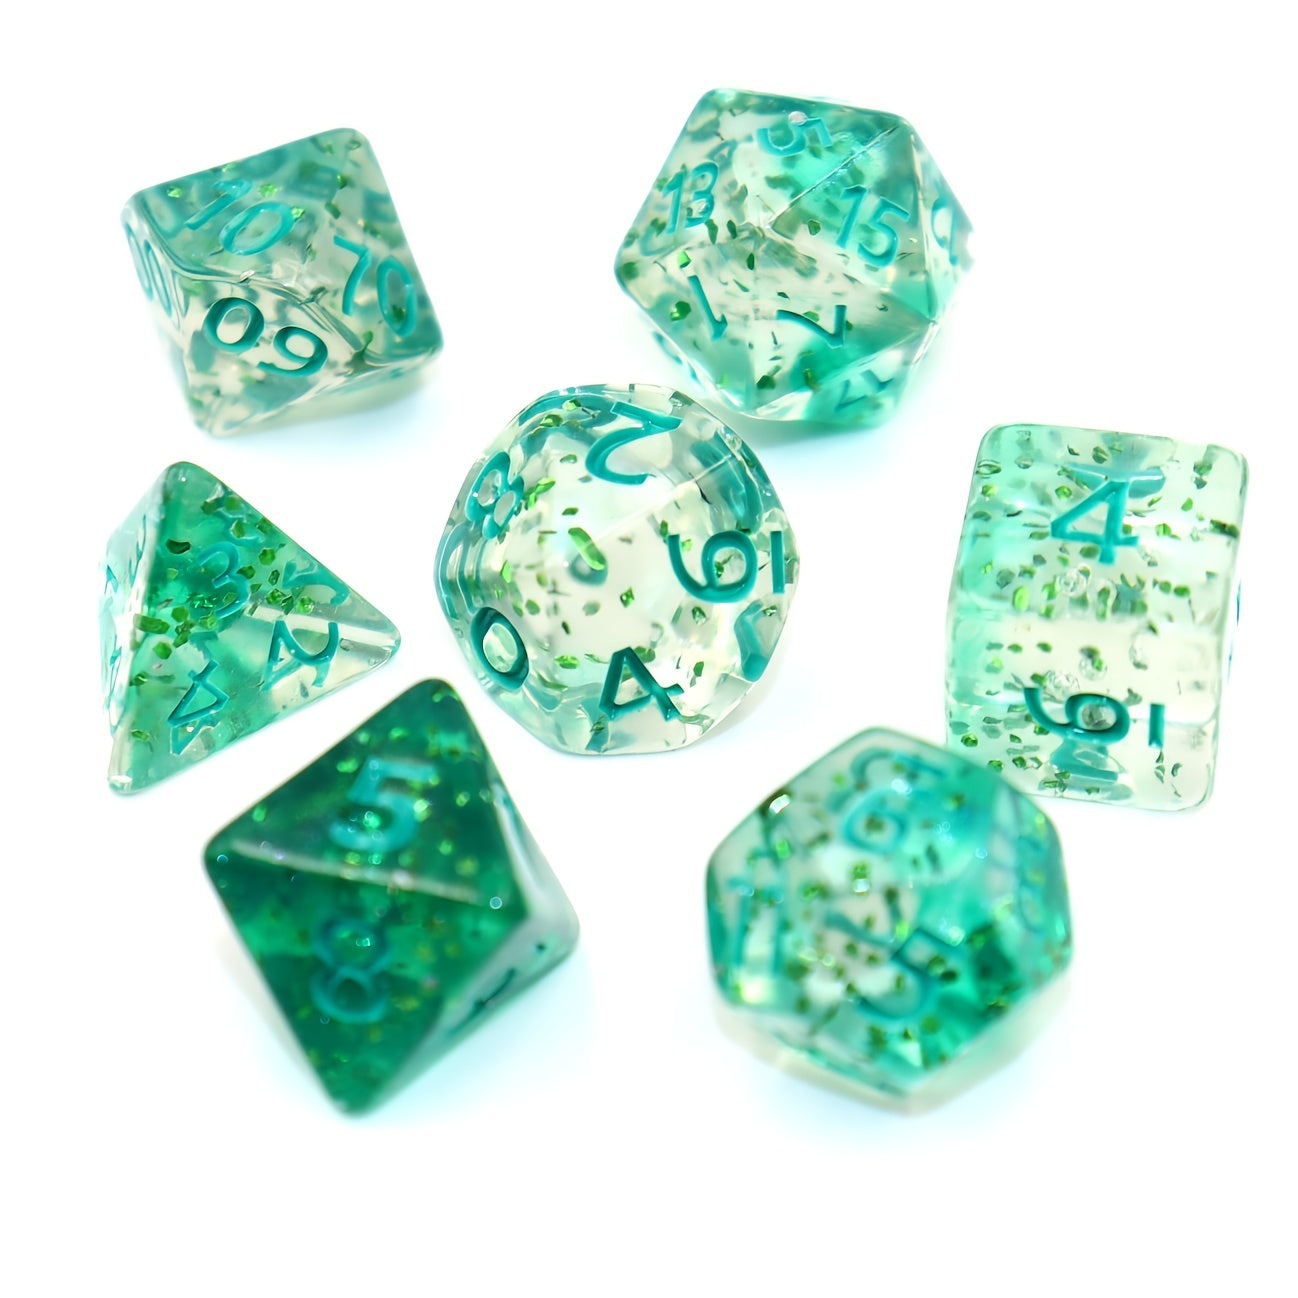 FREE Today: Crystal Style DnD Dice Set